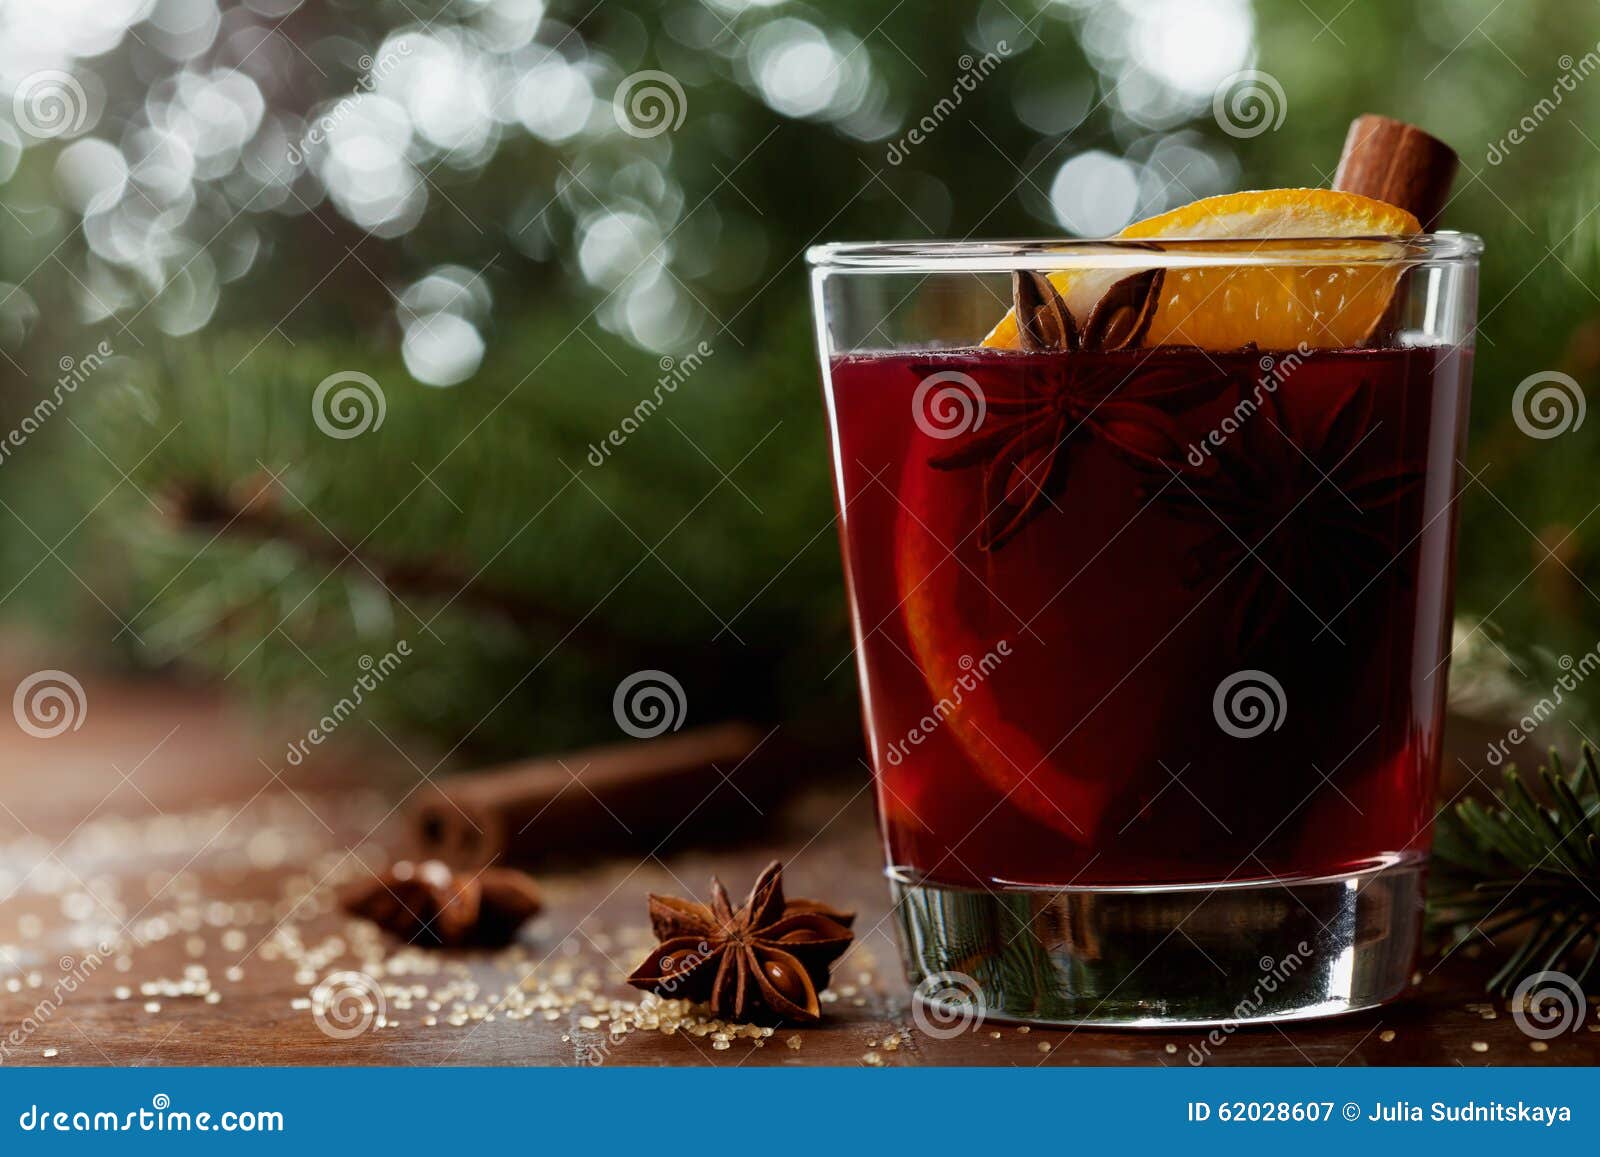 christmas mulled wine or gluhwein with spices and orange slices on rustic table, traditional drink on winter holiday, magic light